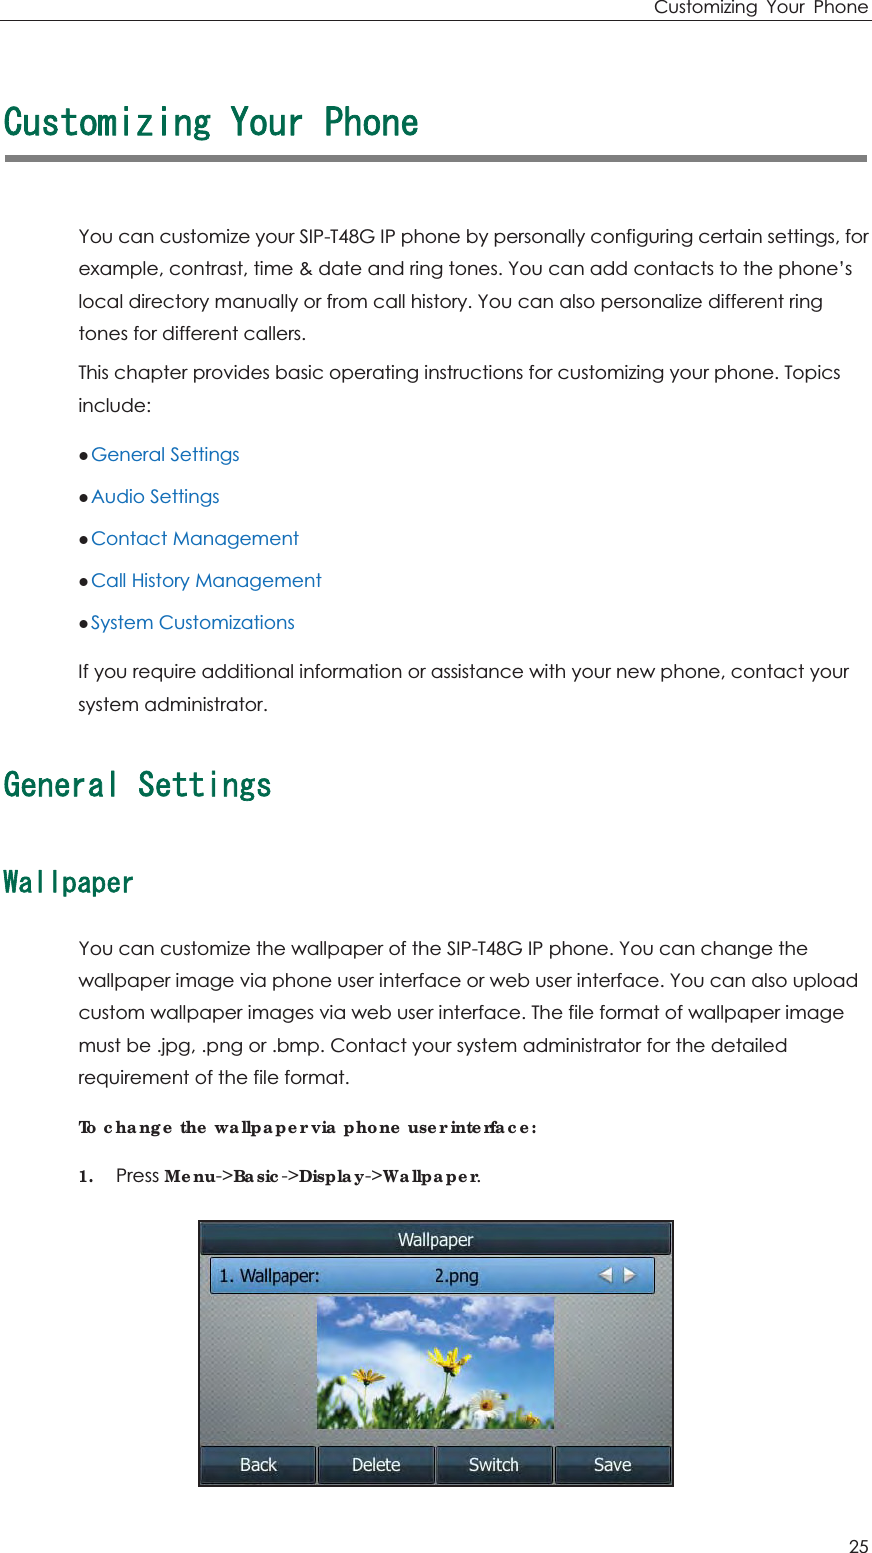 Customizing Your Phone 25 %WUVQOK\KPI;QWT2JQPGYou can customize your SIP-T48G IP phone by personally configuring certain settings, for example, contrast, time &amp; date and ring tones. You can add contacts to the phone’s local directory manually or from call history. You can also personalize different ring tones for different callers. This chapter provides basic operating instructions for customizing your phone. Topics include: zGeneral Settings zAudio Settings zContact Management zCall History Management zSystem Customizations If you require additional information or assistance with your new phone, contact your system administrator. )GPGTCN5GVVKPIU9CNNRCRGTYou can customize the wallpaper of the SIP-T48G IP phone. You can change the wallpaper image via phone user interface or web user interface. You can also upload custom wallpaper images via web user interface. The file format of wallpaper image must be .jpg, .png or .bmp. Contact your system administrator for the detailed requirement of the file format. To change the wallpaper via phone user interface: 1. Press Menu-&gt;Basic-&gt;Display-&gt;Wallpaper.  